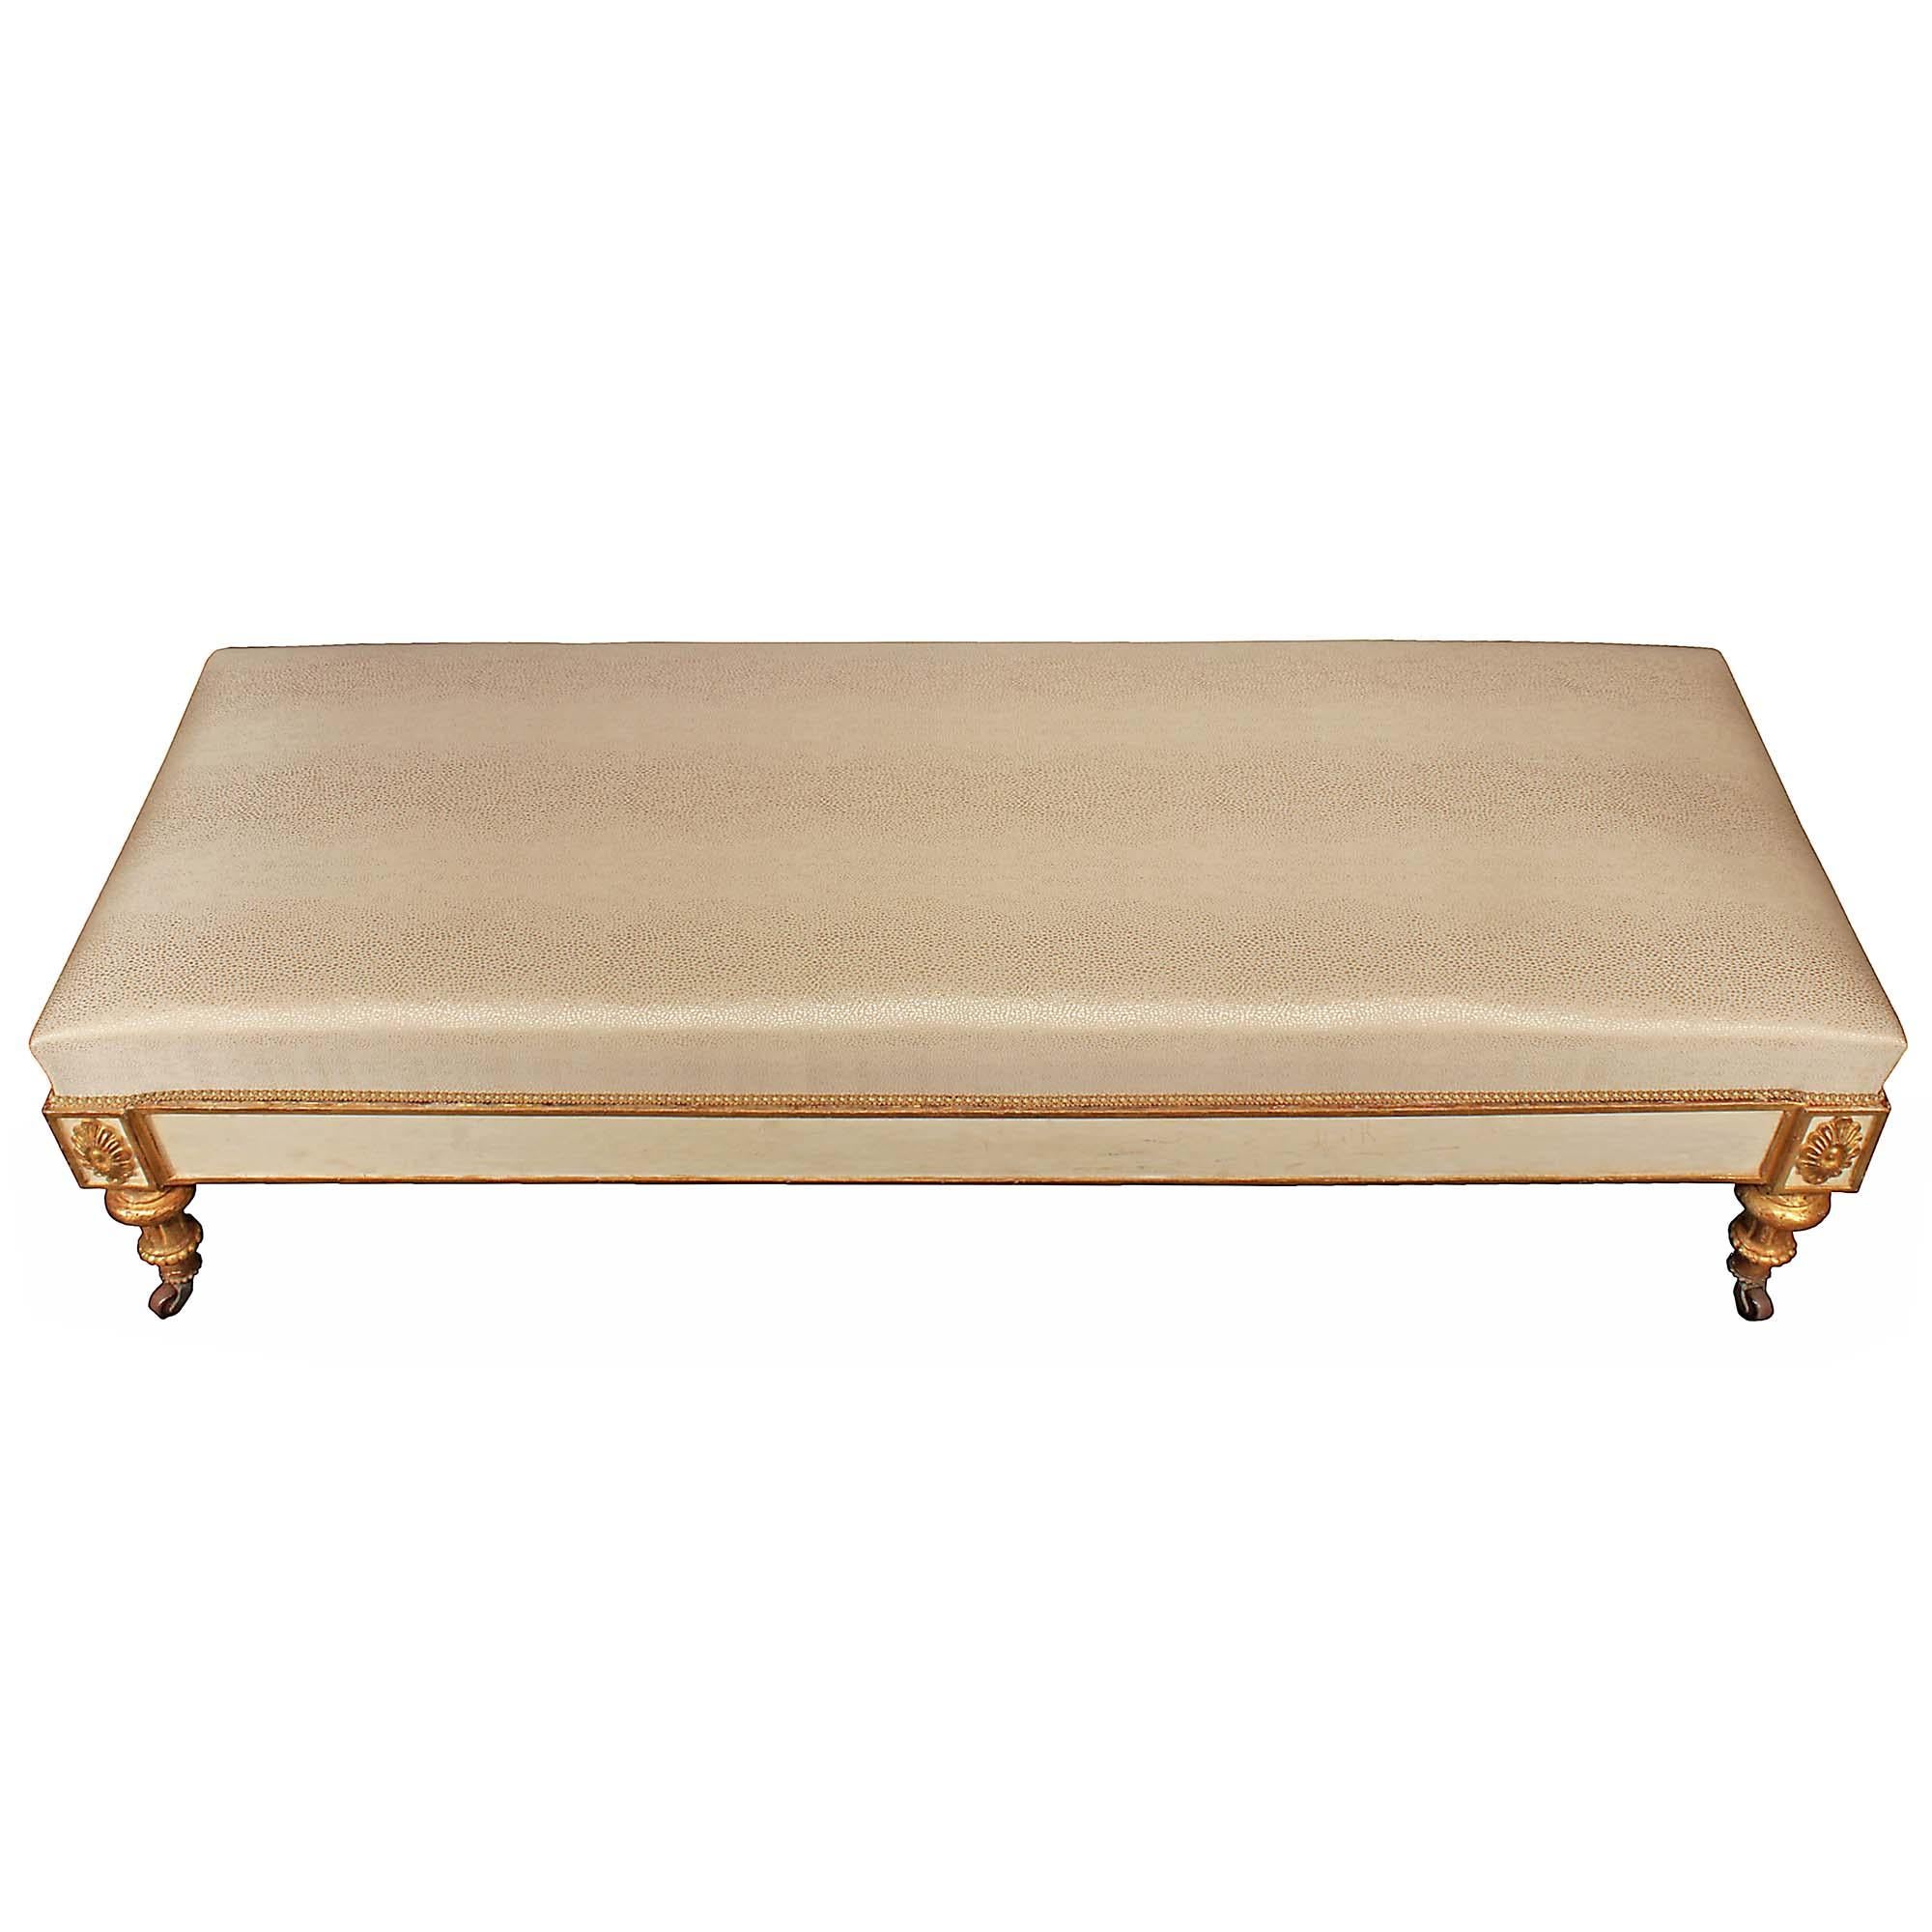 A stunning and unique Italian 18th century Louis XVI period patinated and giltwood bench. The bench is raised on square scrolled back supports and turned carved giltwood front supports with casters. The cream patinated frieze is decorated at the